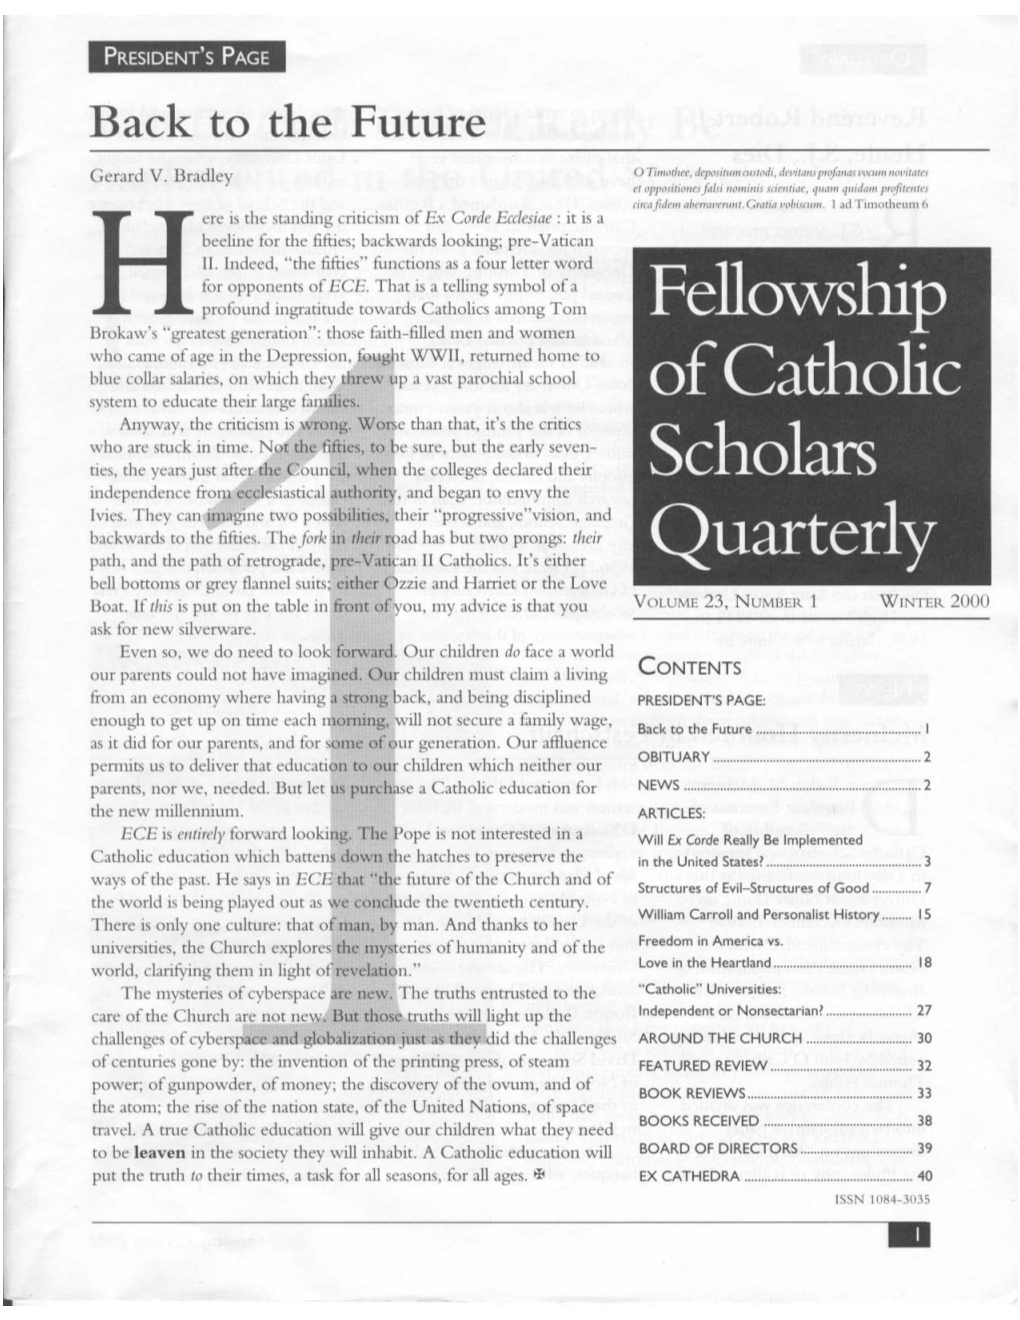 Fellowship of Catholic the Philosophy of Religion" and Banquet, Where Fr